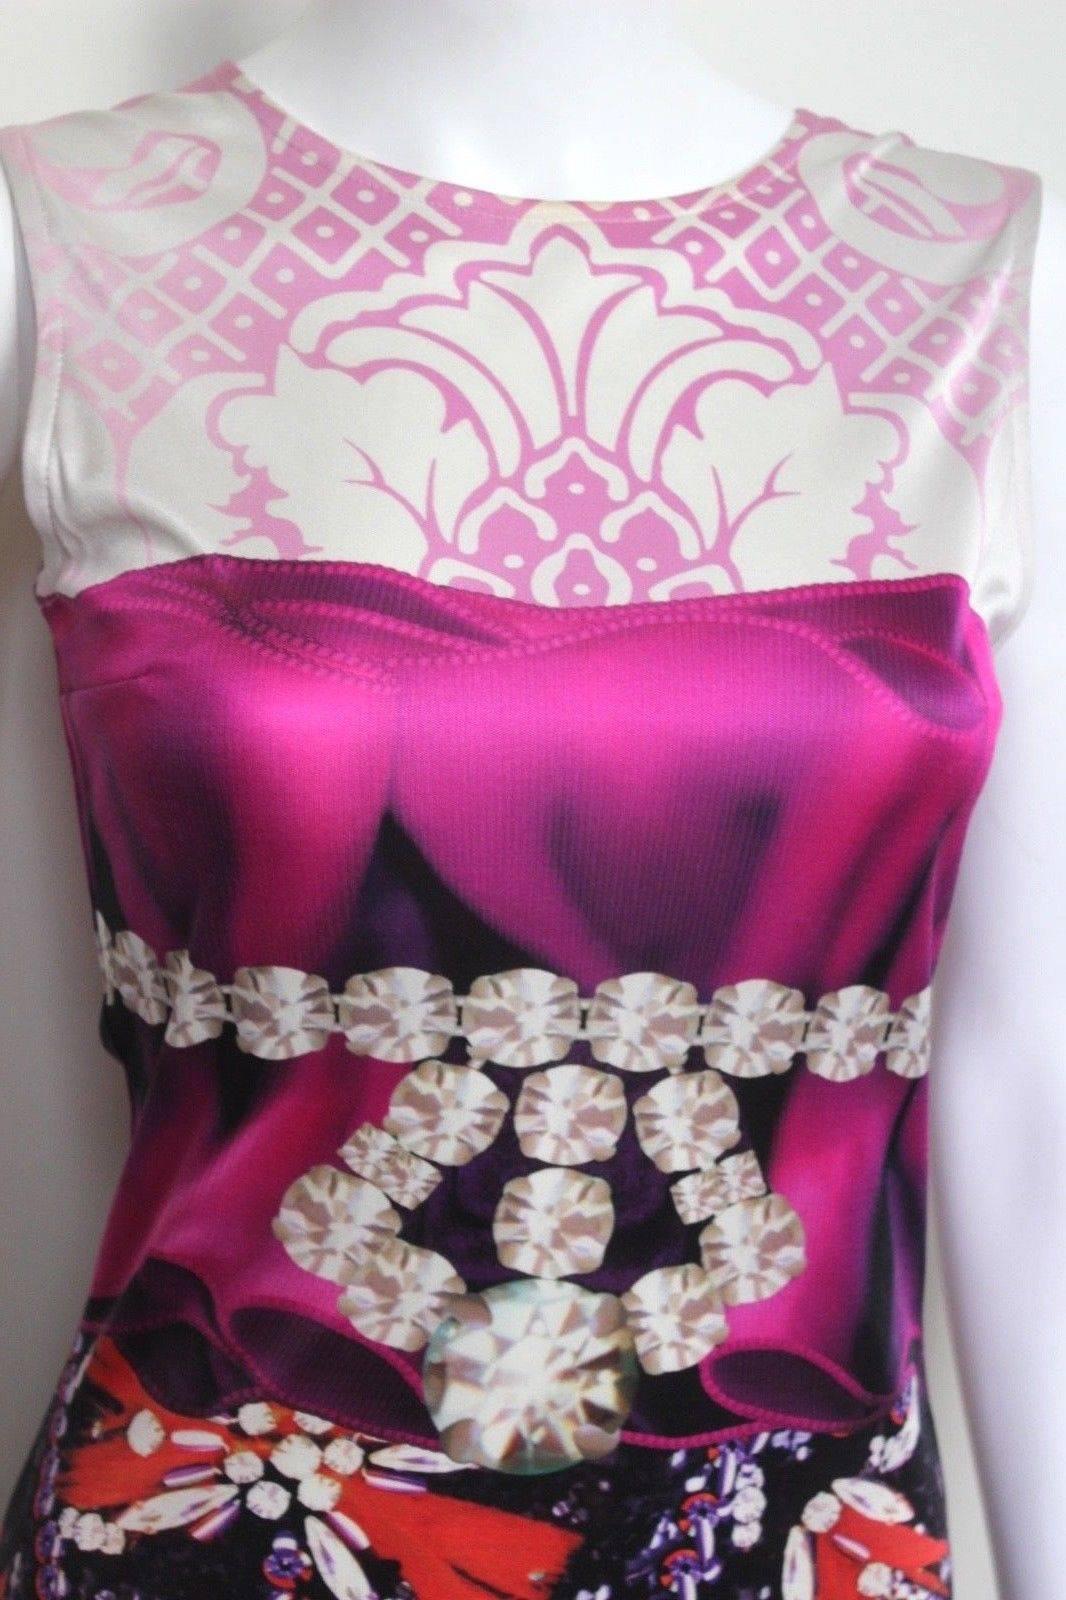 MARY KATRANTZOU Pink Jewel Print Stretch Dress S  In Excellent Condition For Sale In London, GB